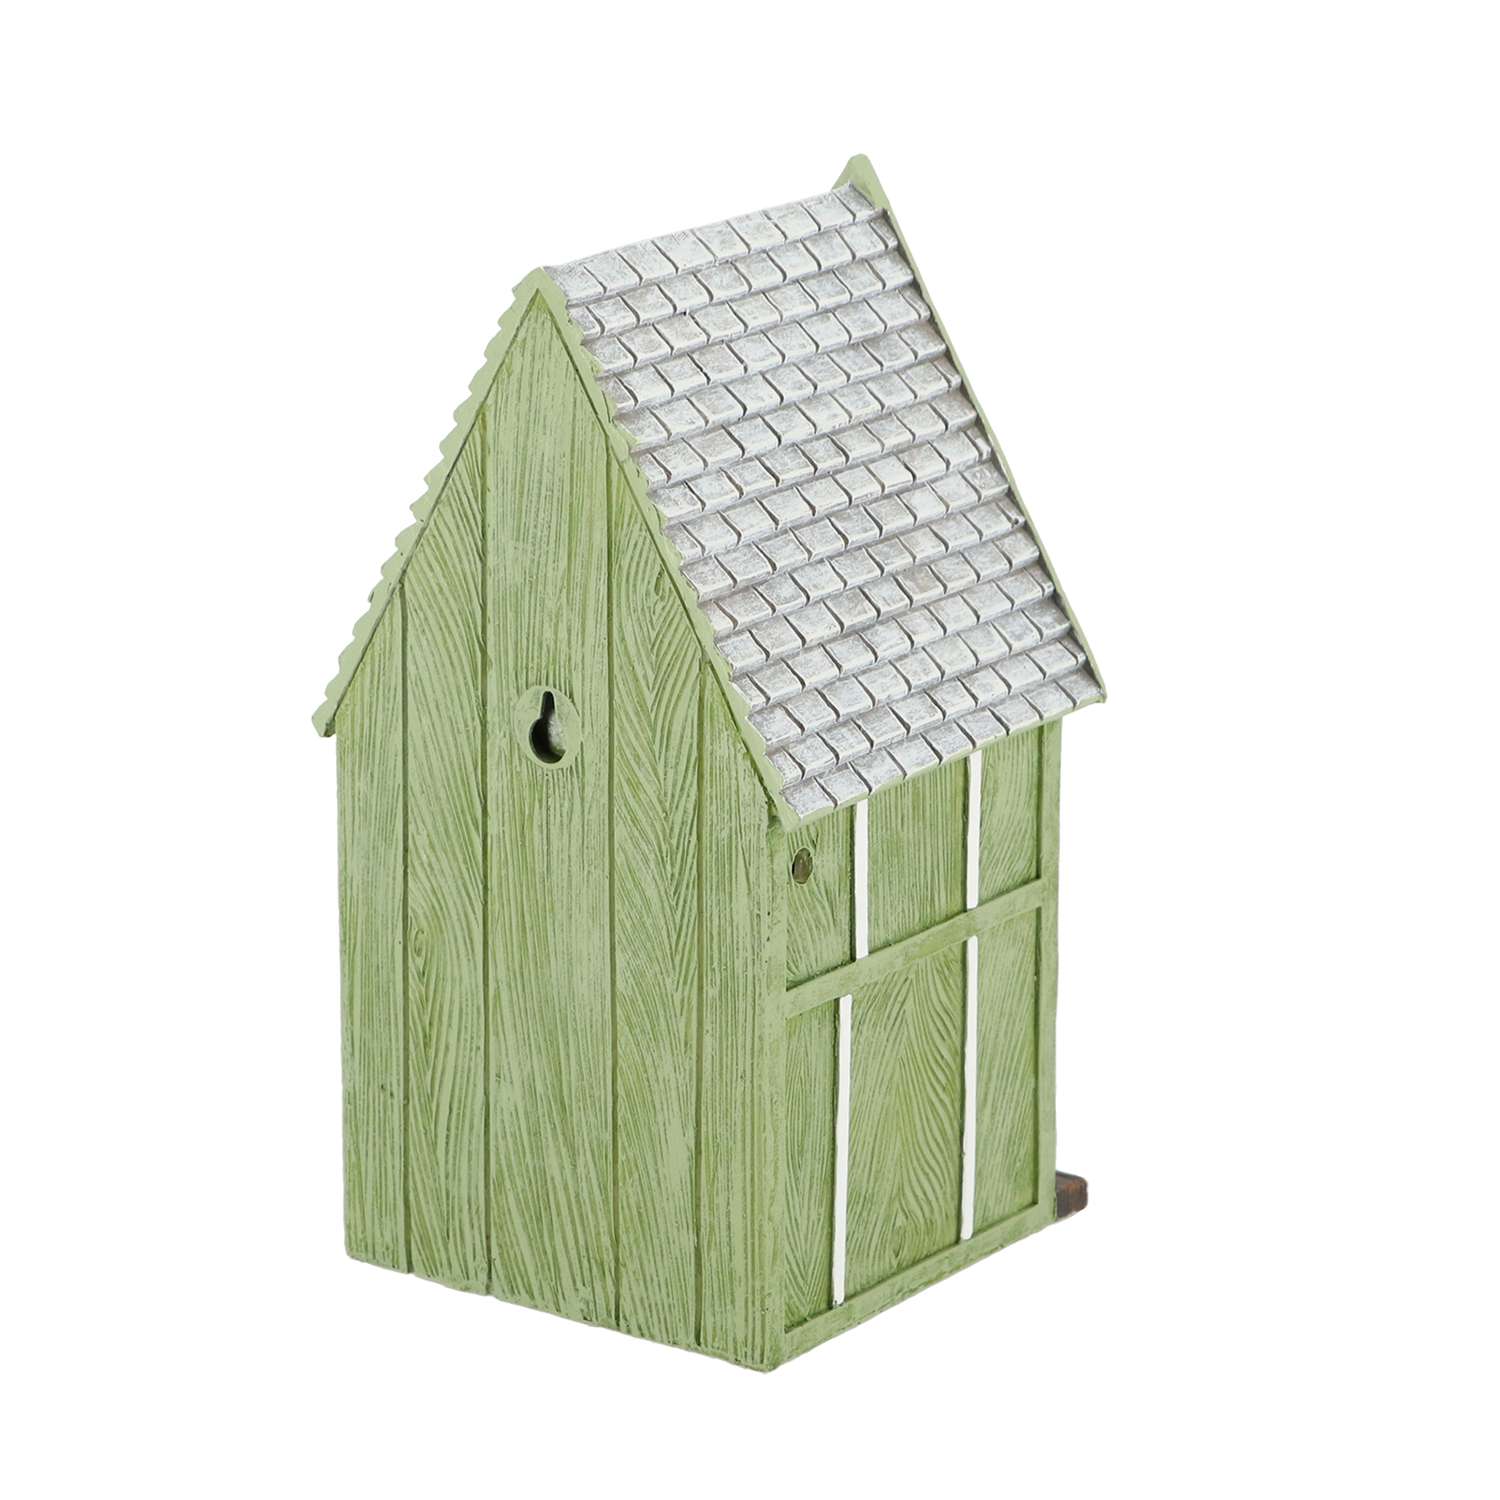 Garden Shed Bird House from the back